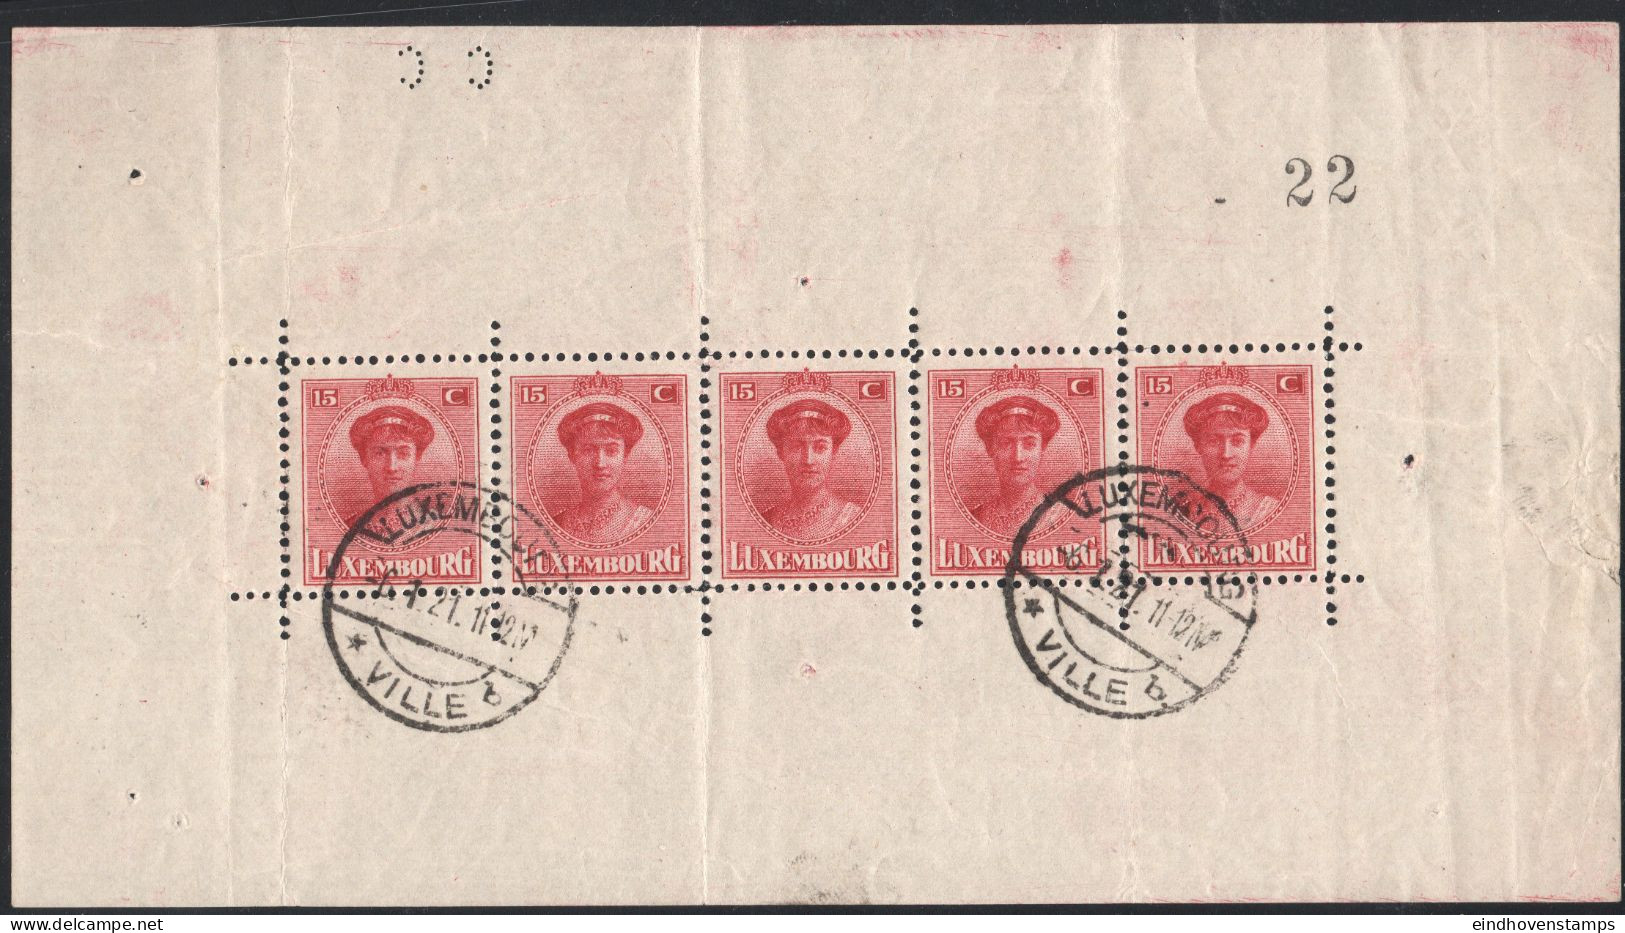 Luxemburg 1921 Jan 6 Minisheet Of 5 Stamps Charlotte FDC Cancel Folds And Usual Wrinkles Outside The Stamps - 1921-27 Charlotte De Face